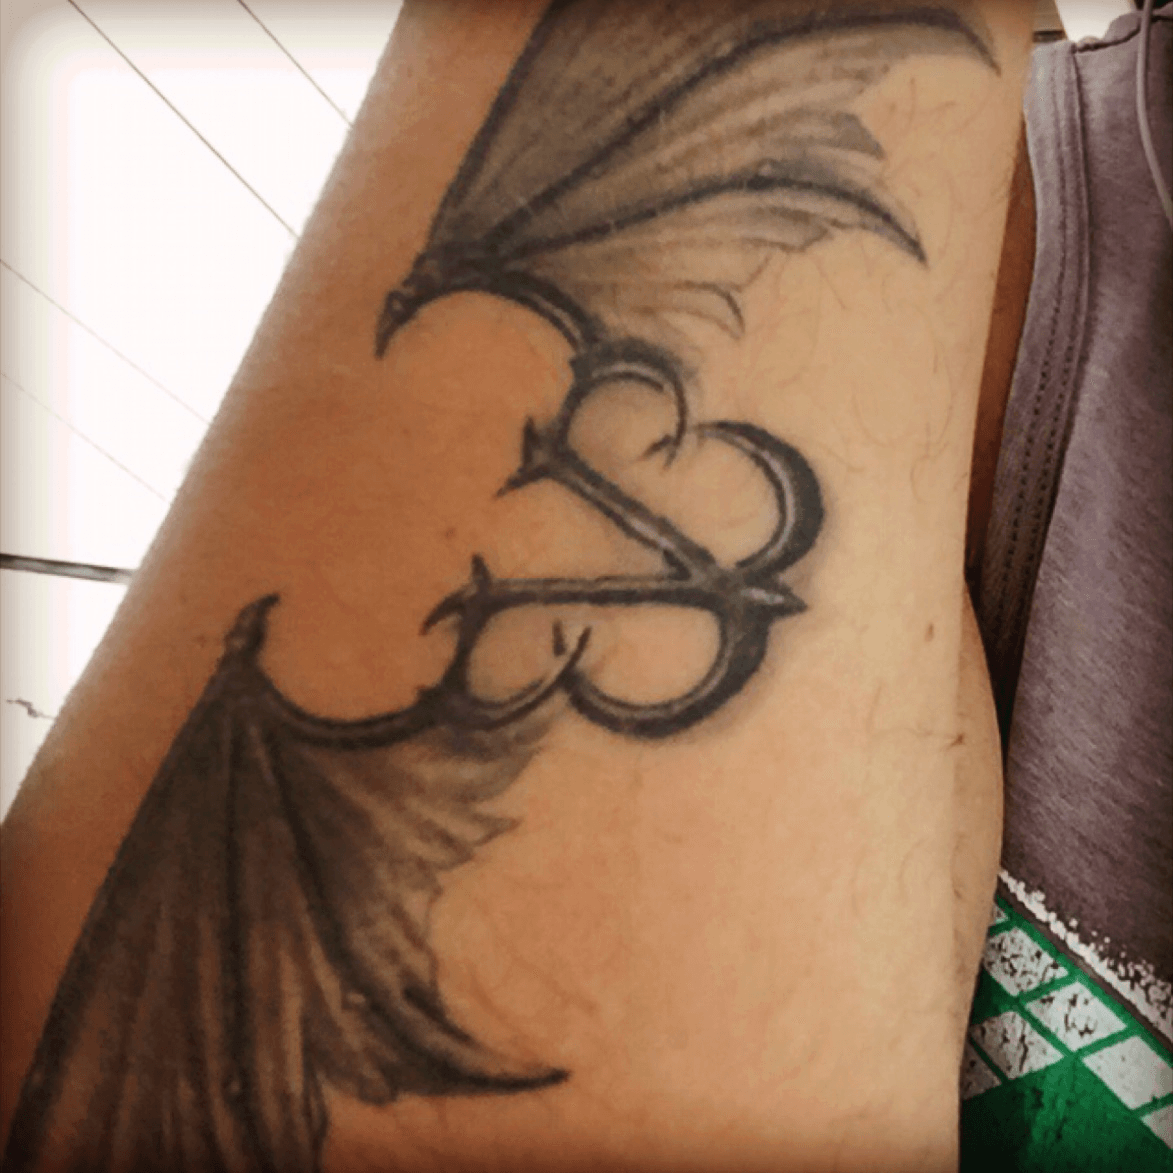 Black Veil Brides  BVB fan of the day tattoo from mungles666 on Instagram   Facebook